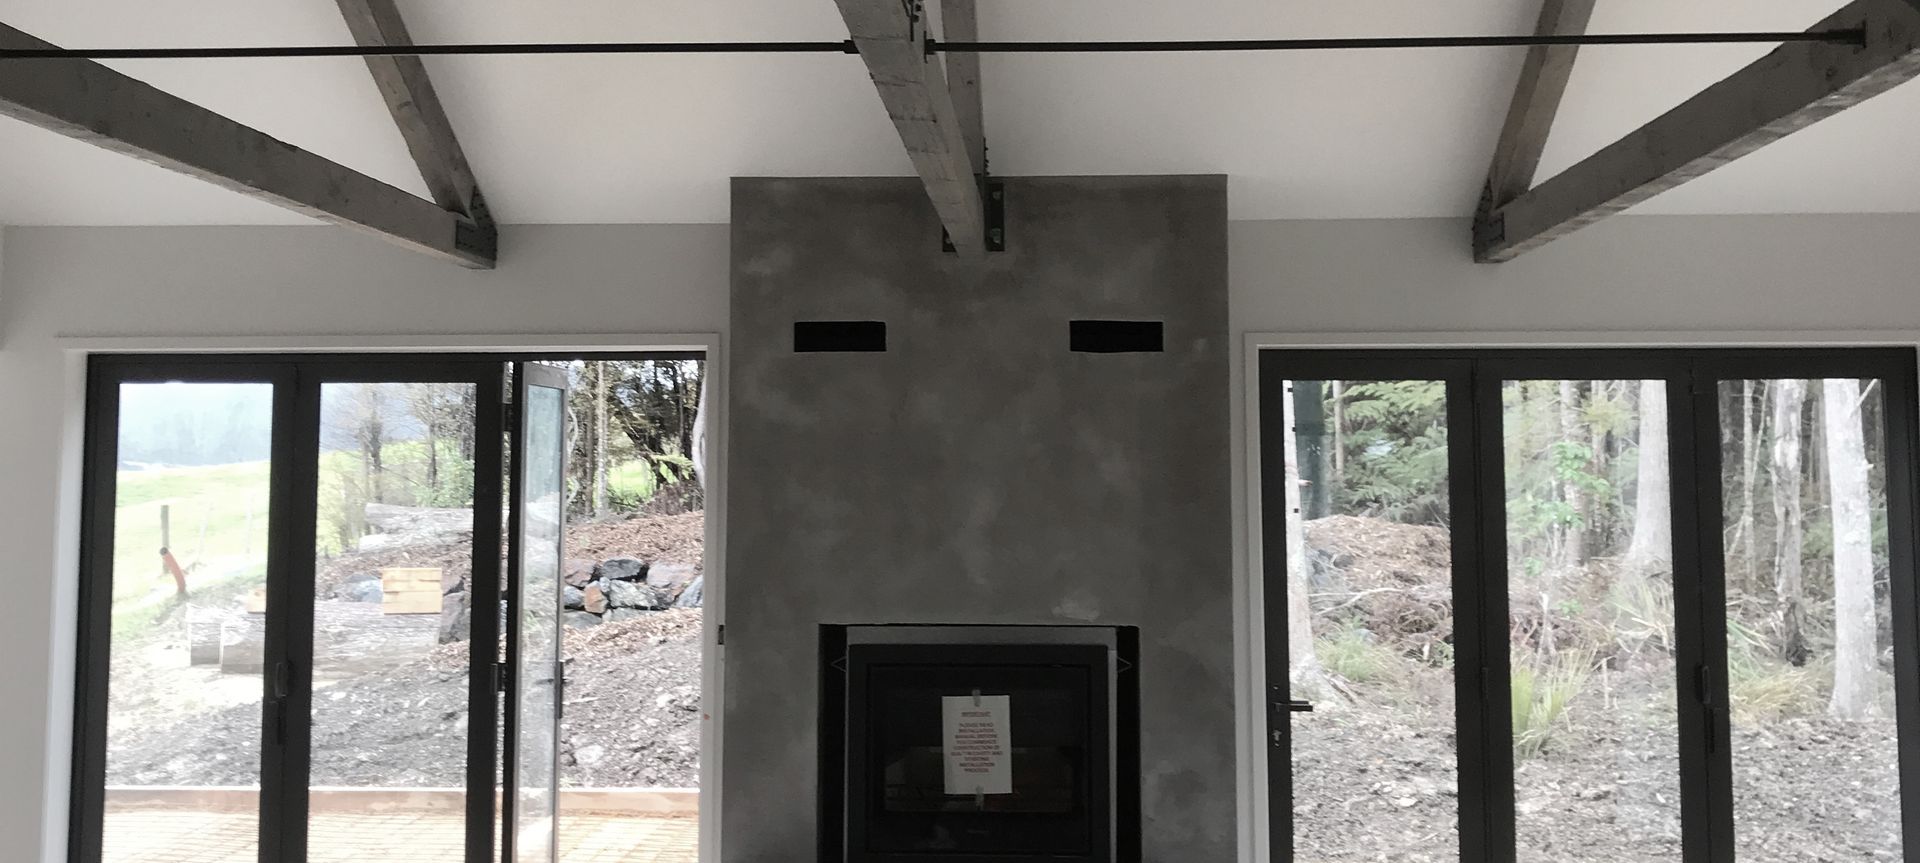 Venetian plaster - Fireplace - Aged concrete look banner